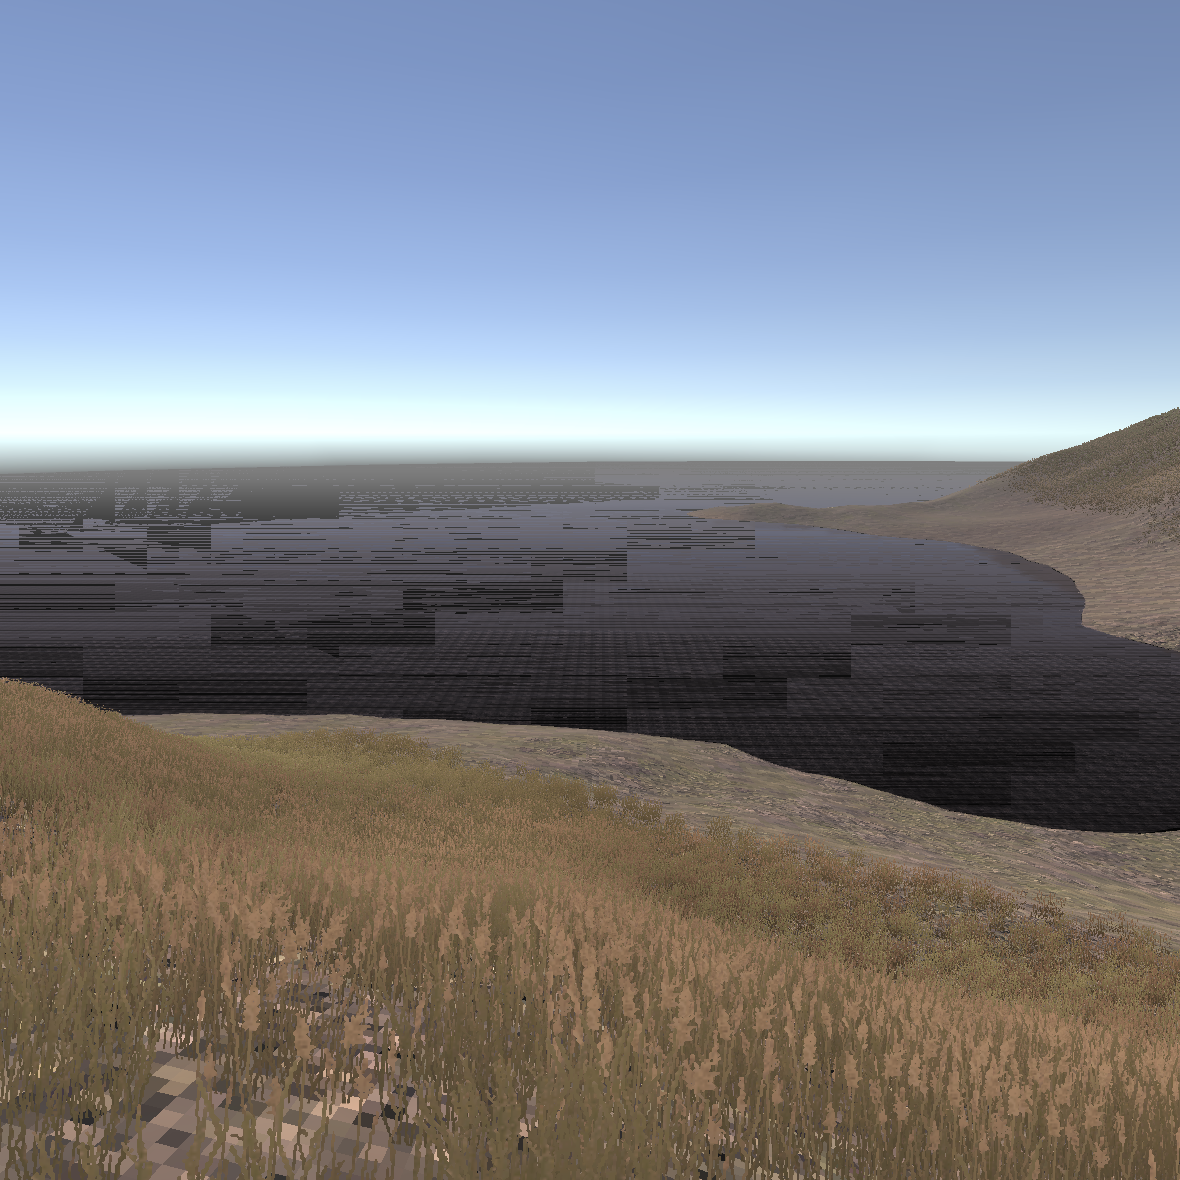 Water behaving badly in WebGL build - looks choppy and pixellated